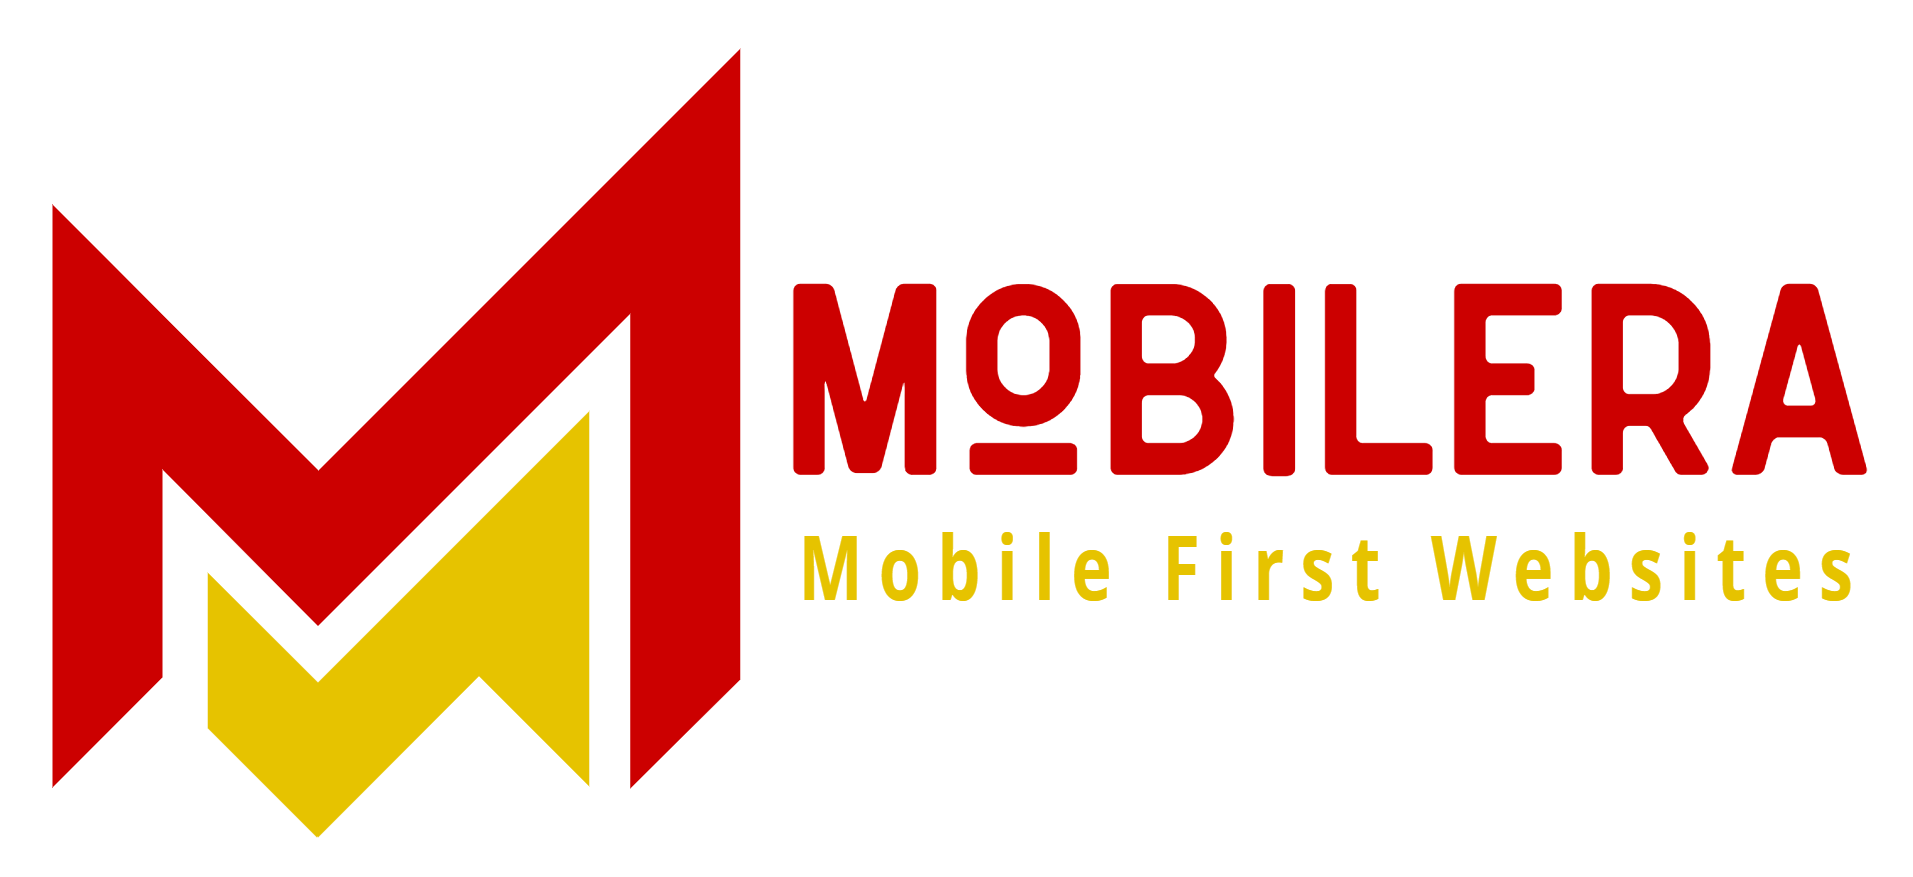 What Is A Mobile First Website?